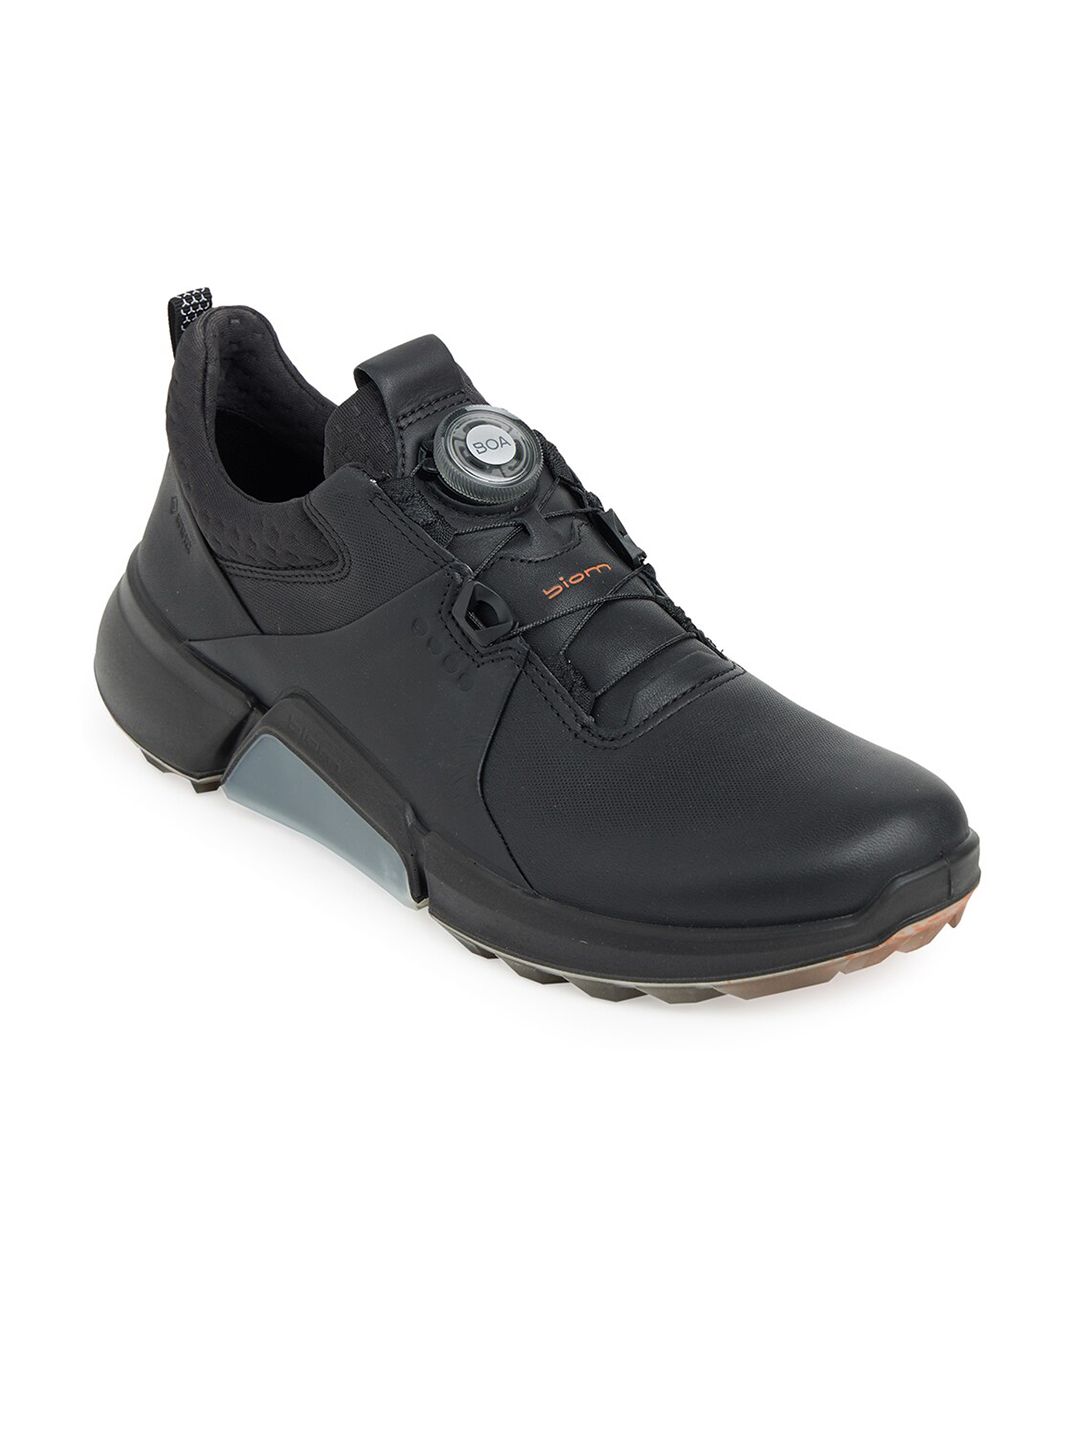 ECCO Women Black Hybrid Performance Leather Golf Non-Marking Shoes Price in India